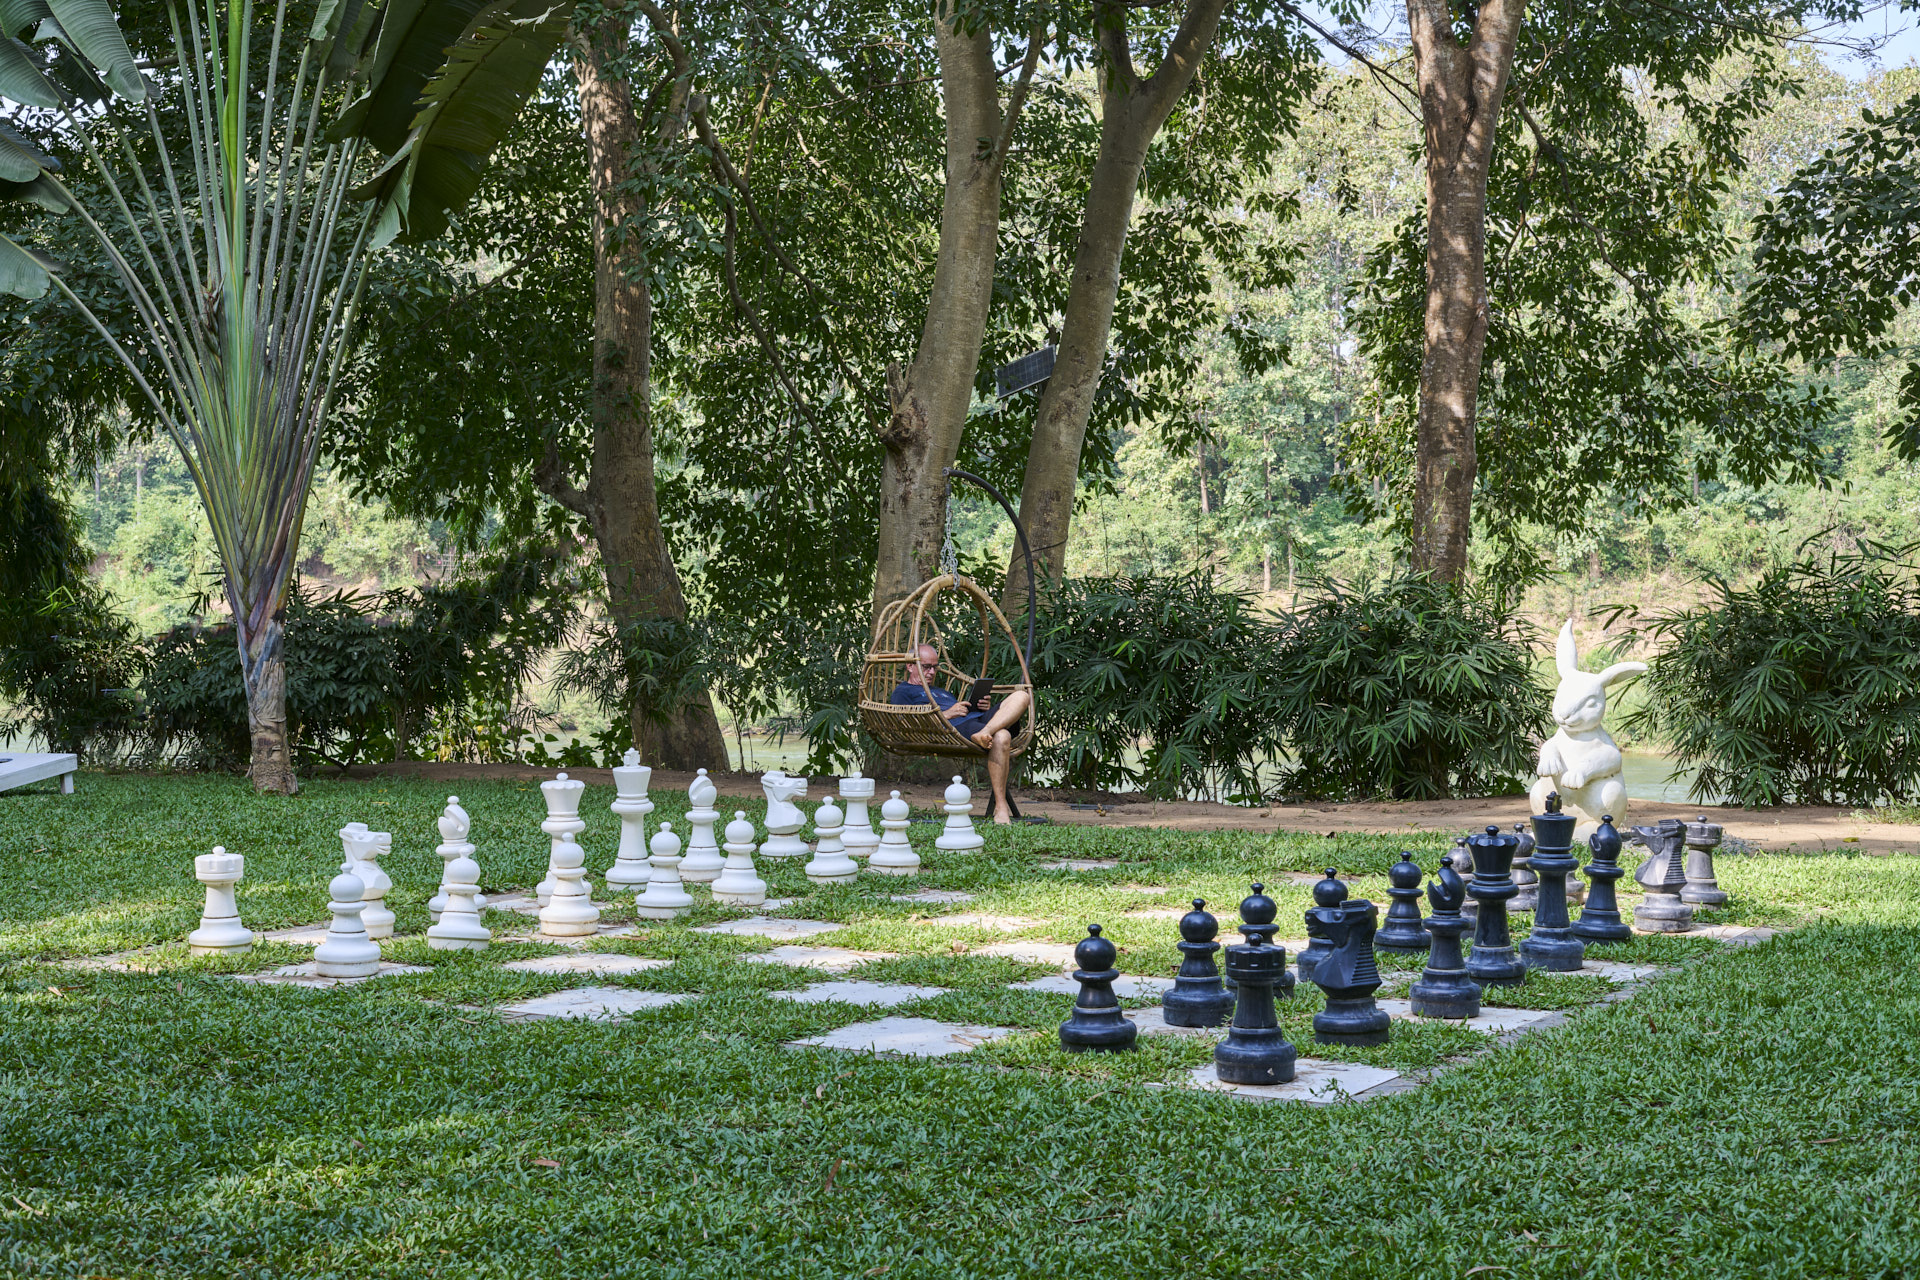 A person sitting in a chair next to a chess board, enjoying the peaceful ambiance of Luang Prabang.